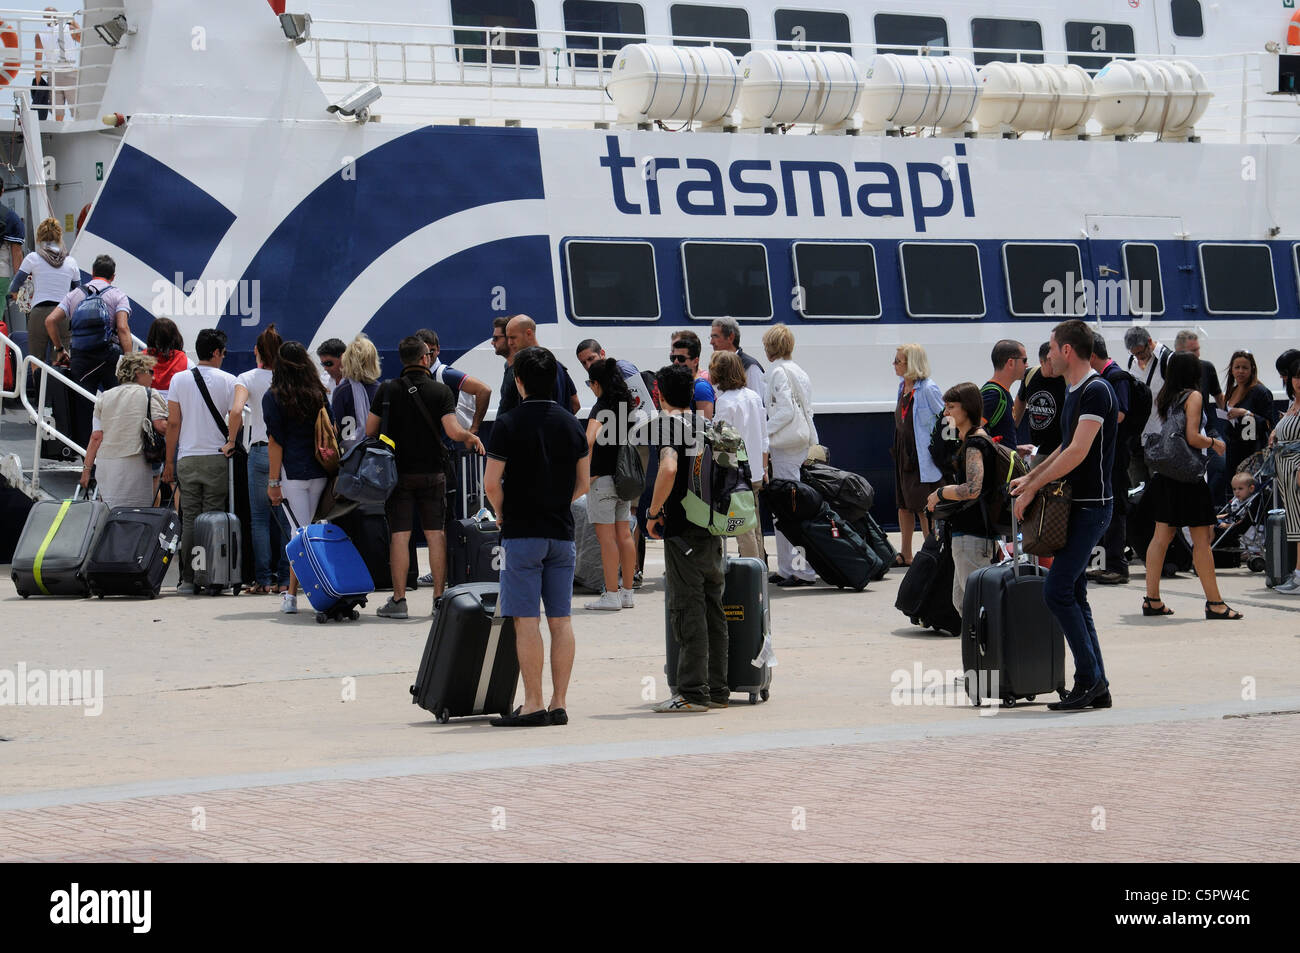 Holiday makers with luggage on wheels boarding a ferry at Eivissa Ibiza bound for Formentera another Spanish island in the Med Stock Photo